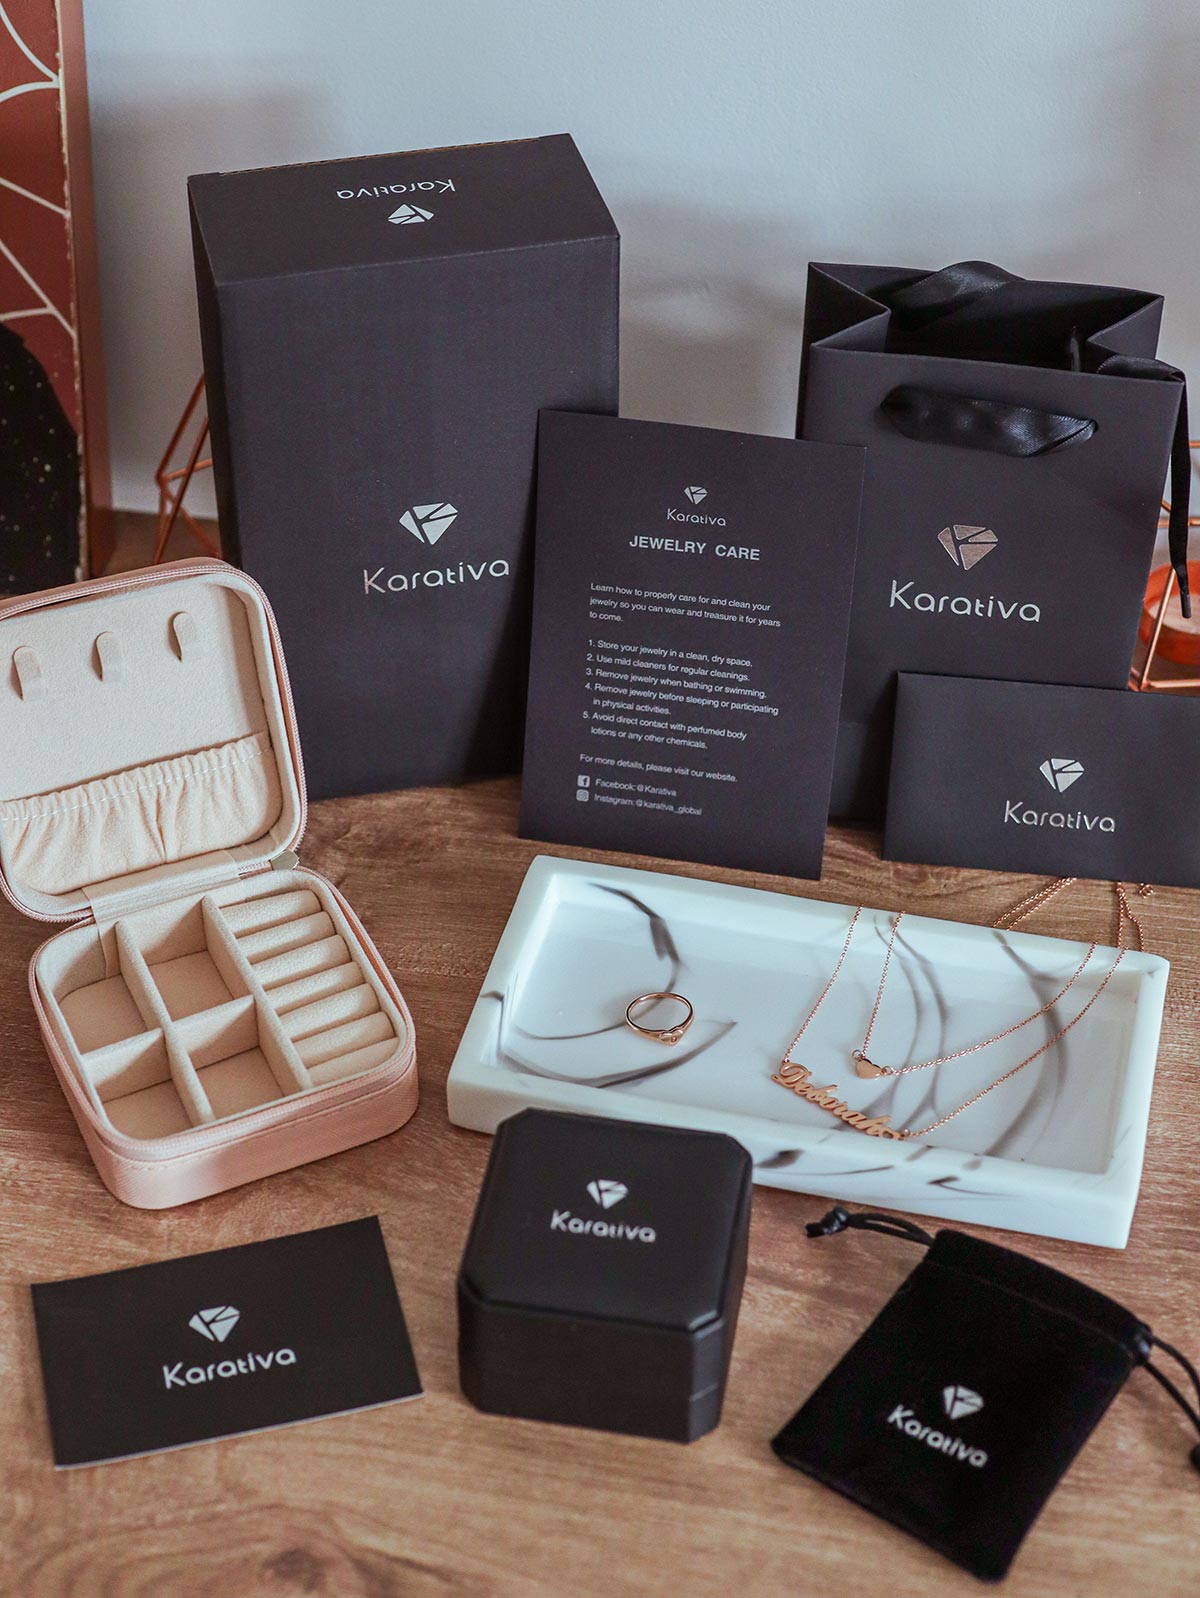 Karativa personalised jewellery and jewellery case review